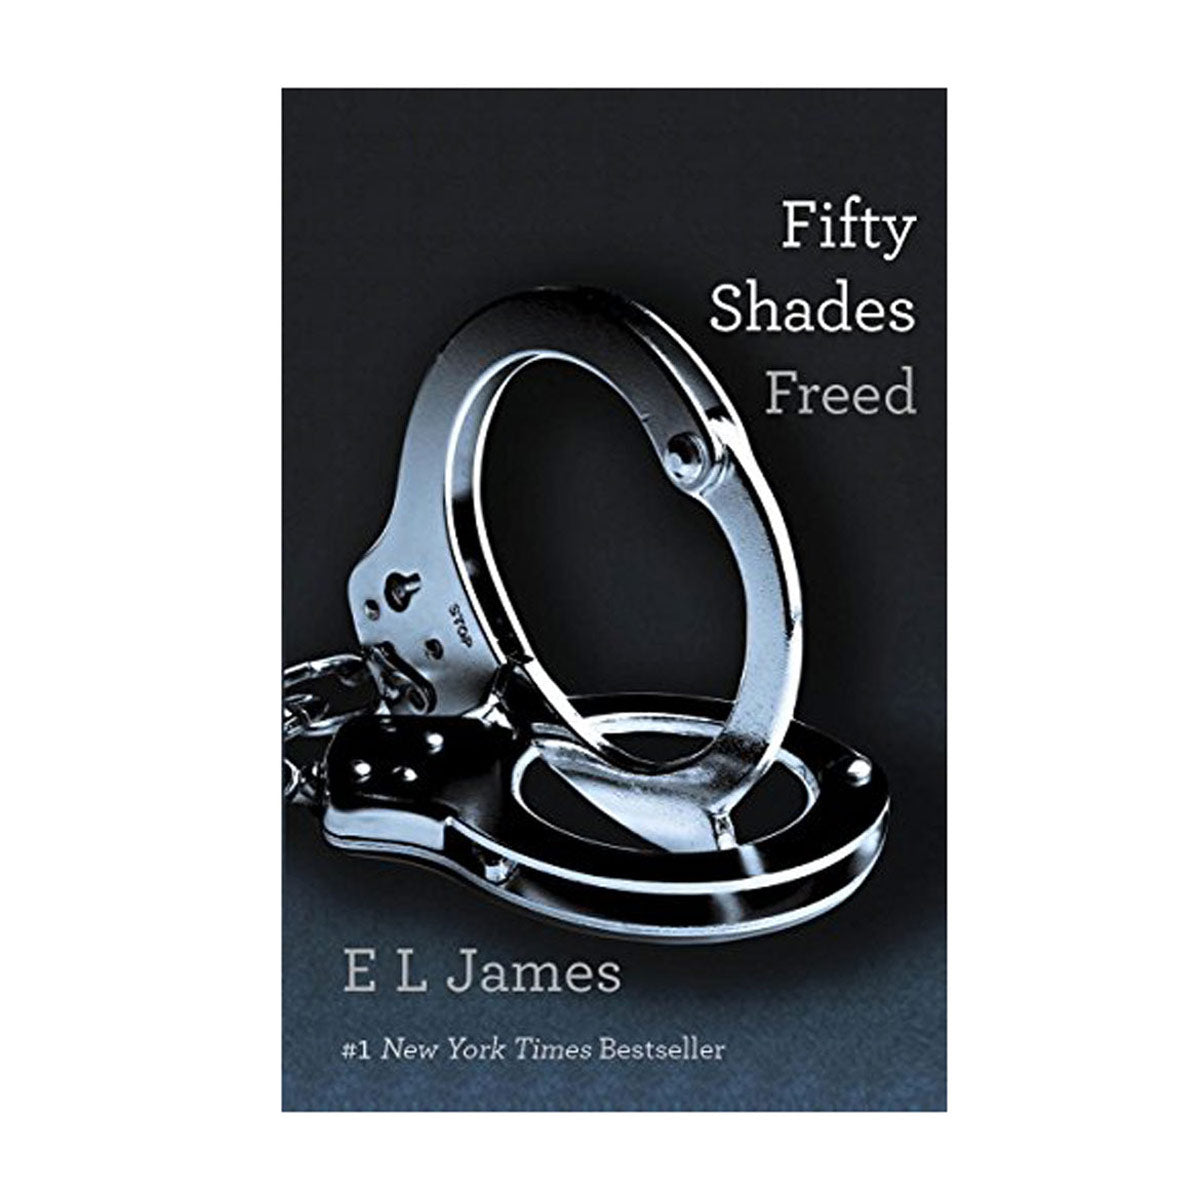 Fifty Shades Freed by E.L. James – Paperback